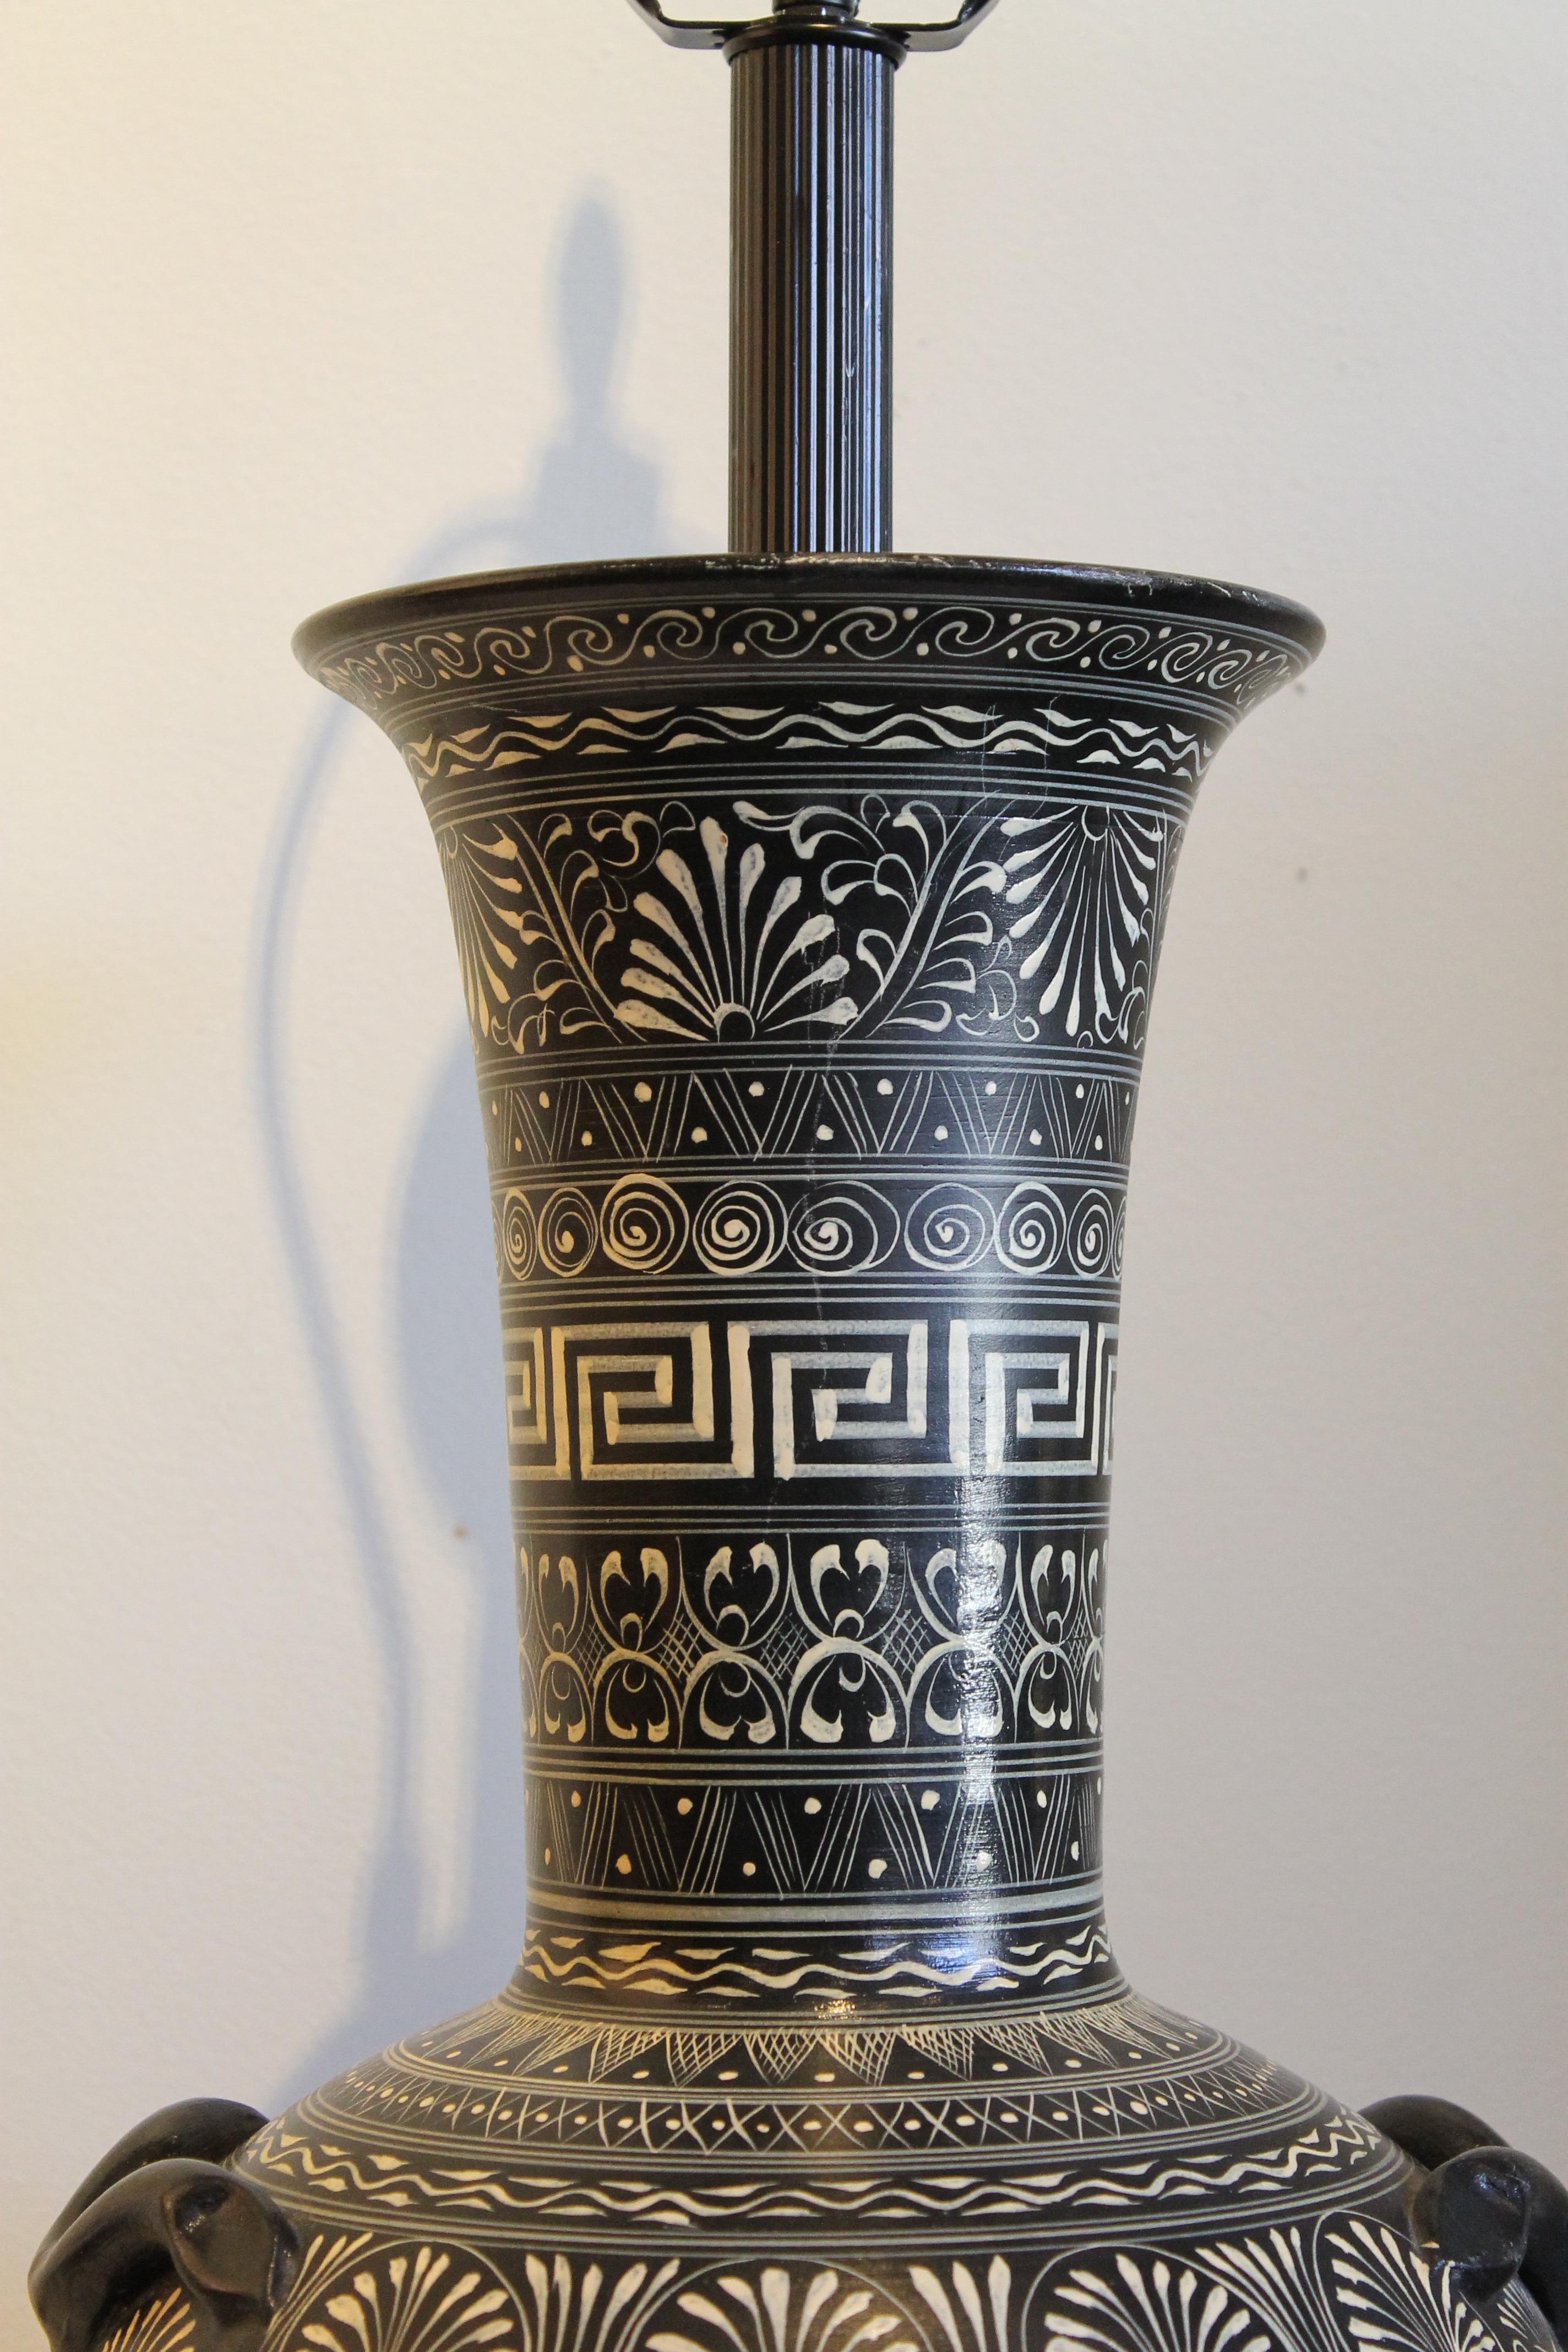 A monumental lamp made from a terra cotta urn or vase, first painted black, then overlaid with intricate patterns in the Greek style, all done by hand. A marble base was added. The lamp measures 27